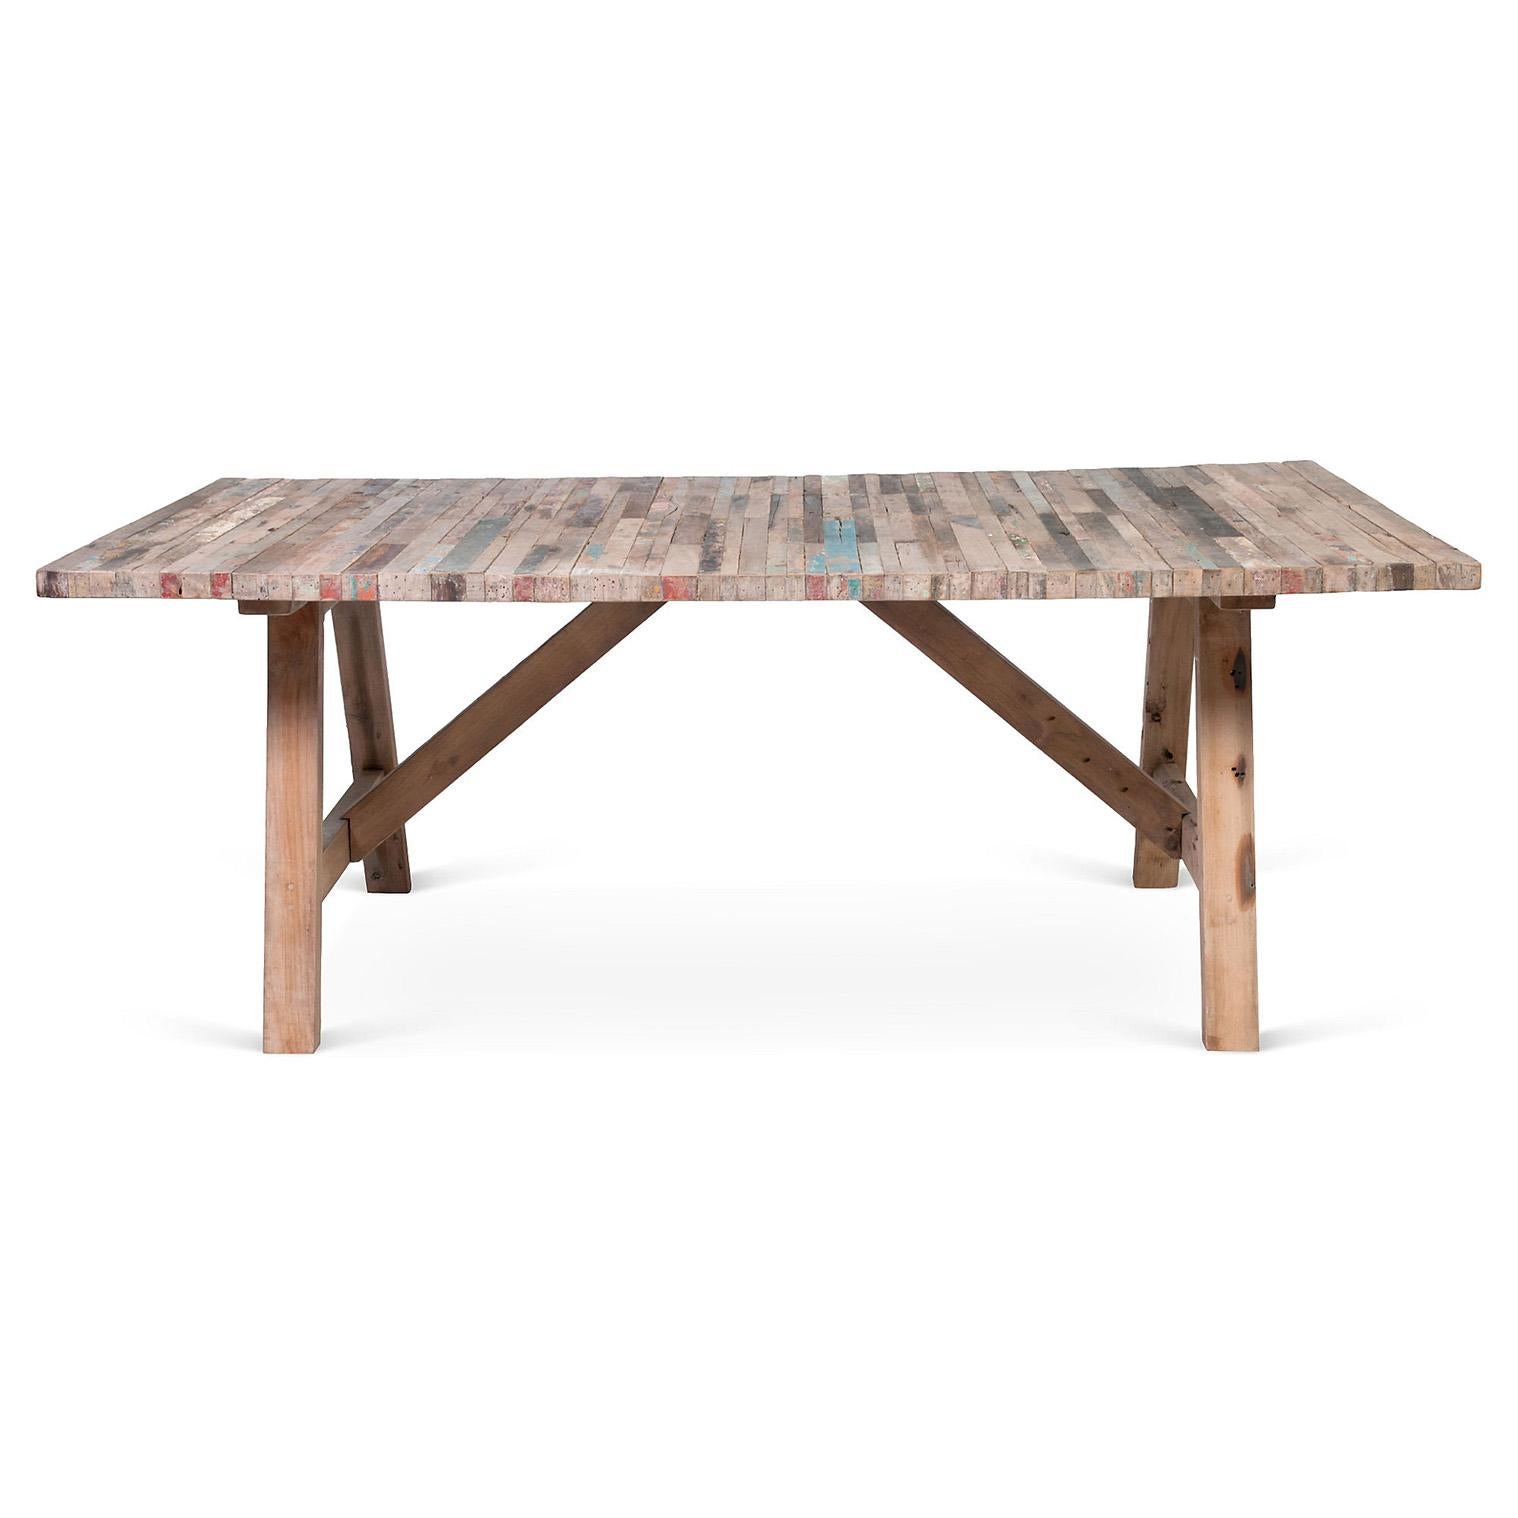 Rustic Salvaged Wood Balinese Trestle Table I For Sale